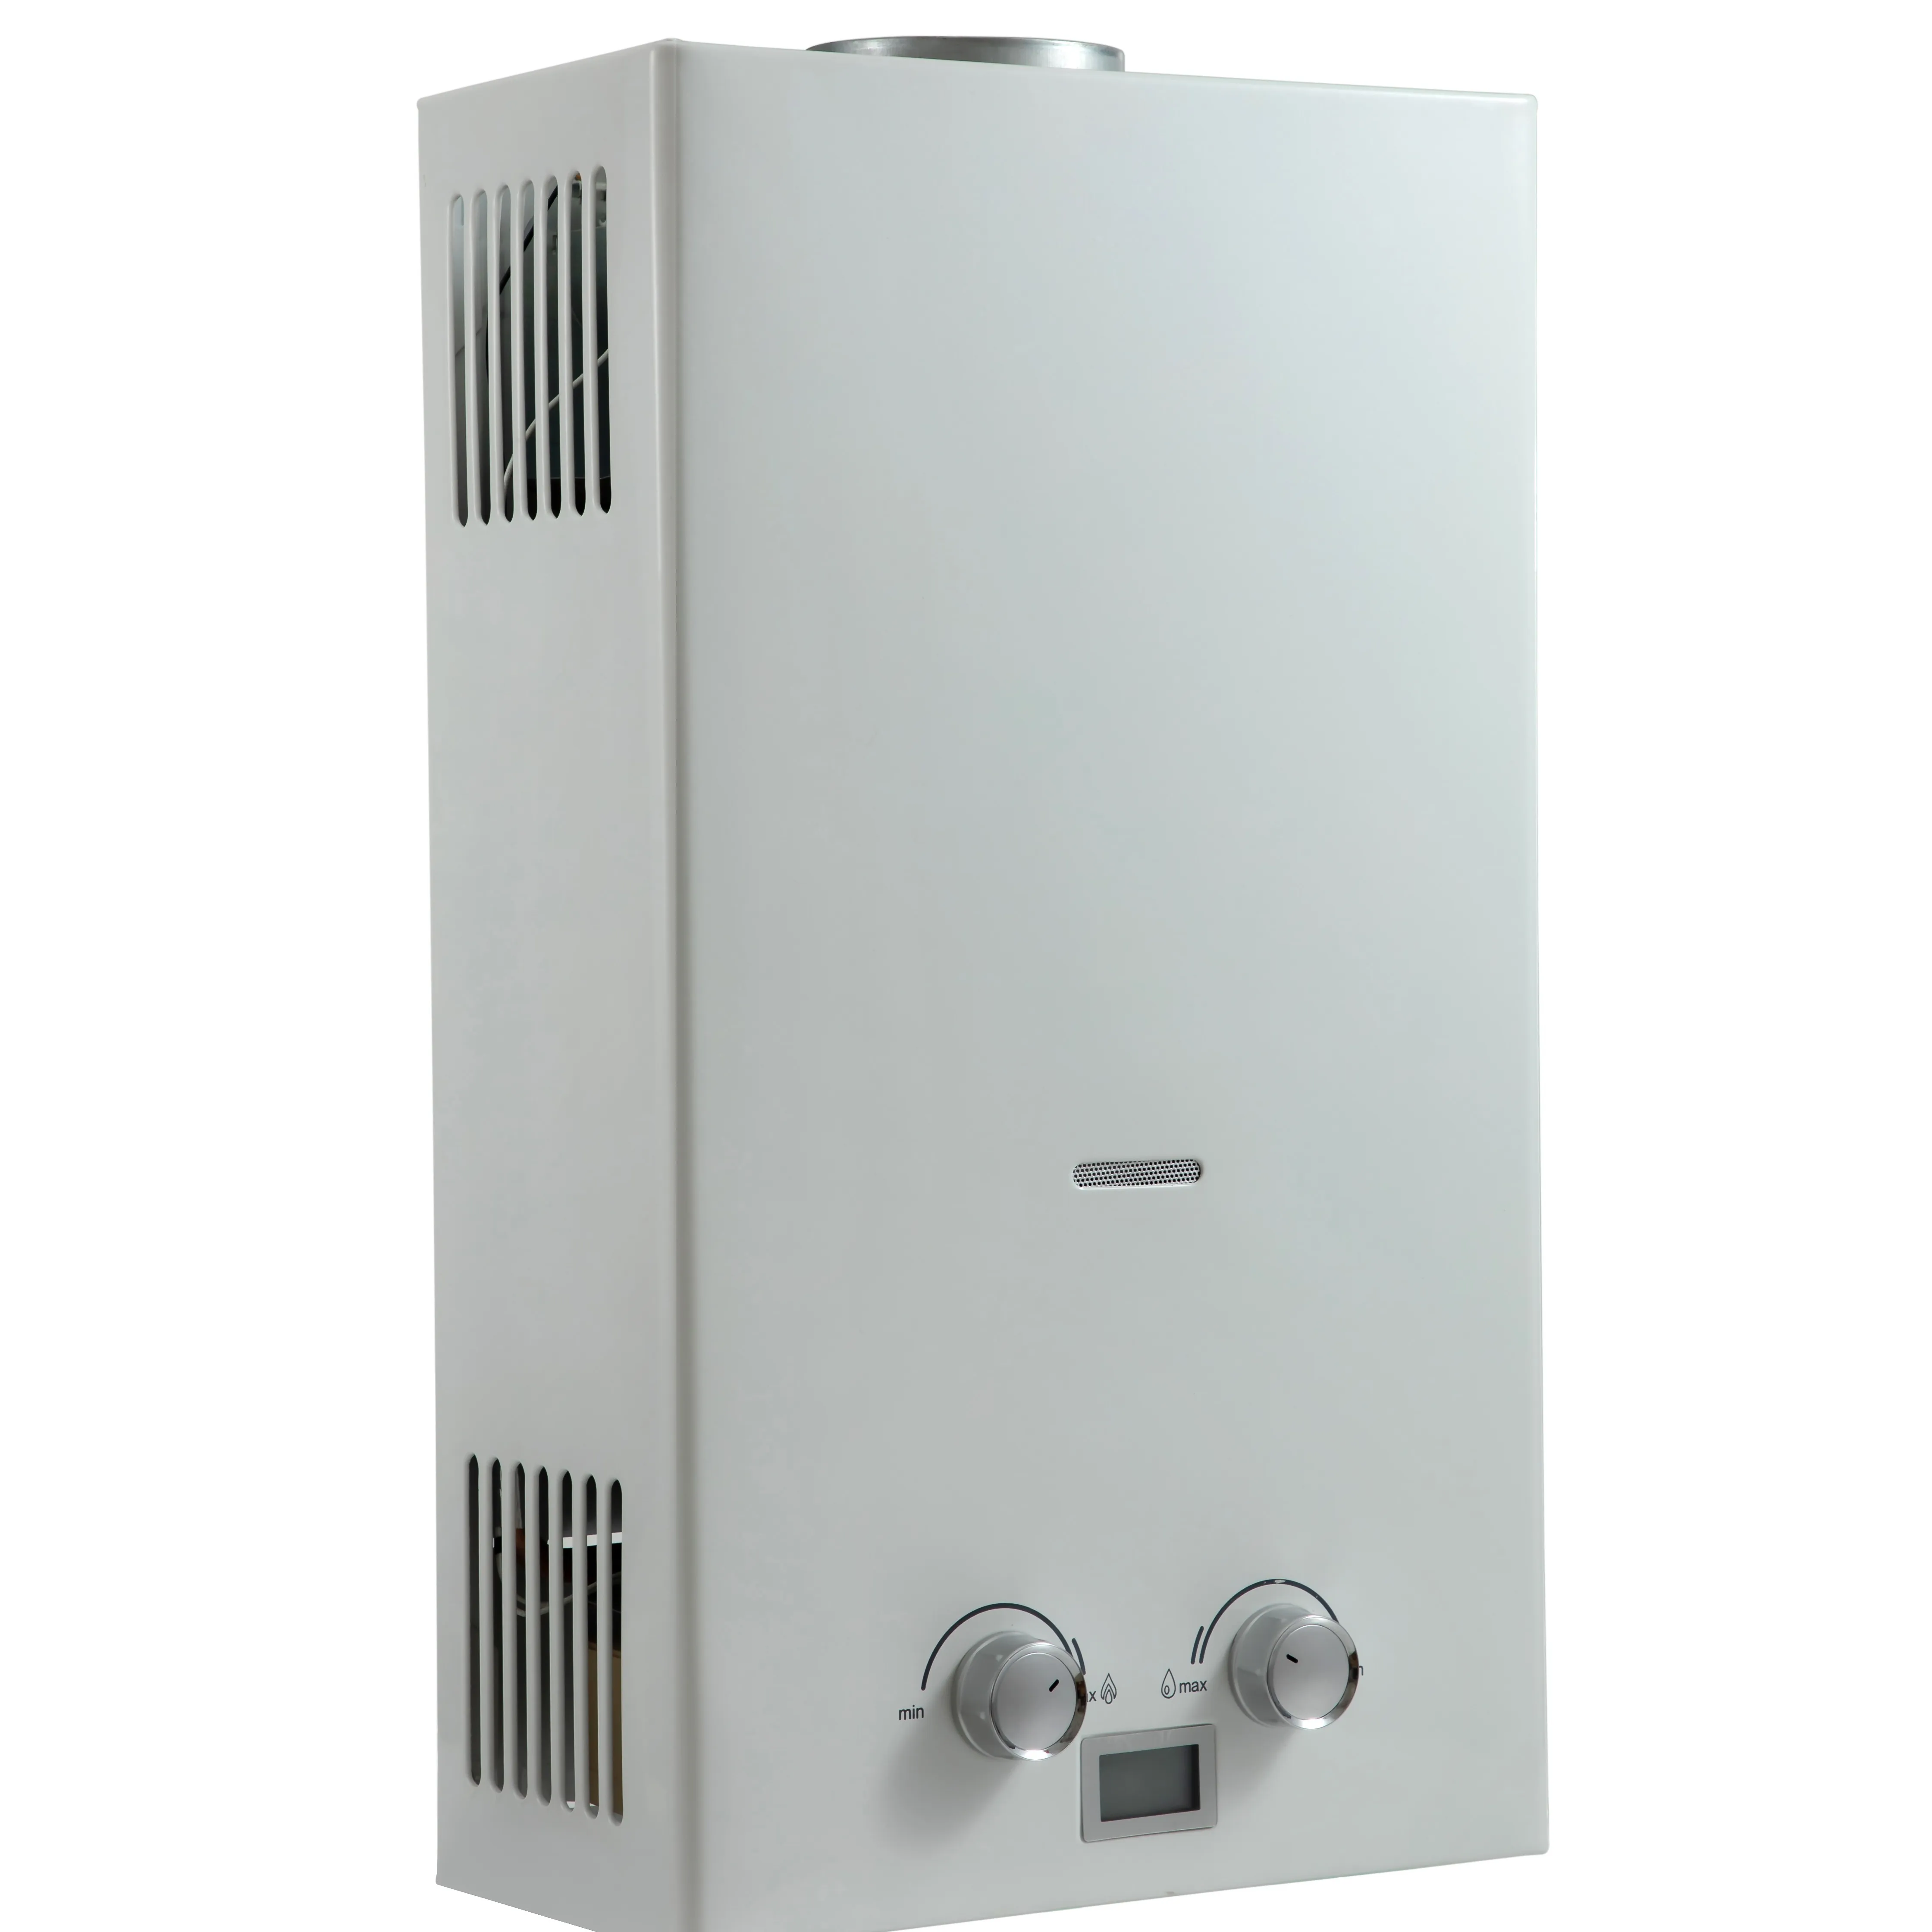 Water Heater Price Cheap Gas Water Heater White Wall Power Storage Parts Good Price Water Heater Tankless Sales Free Heat Warranty YEAR